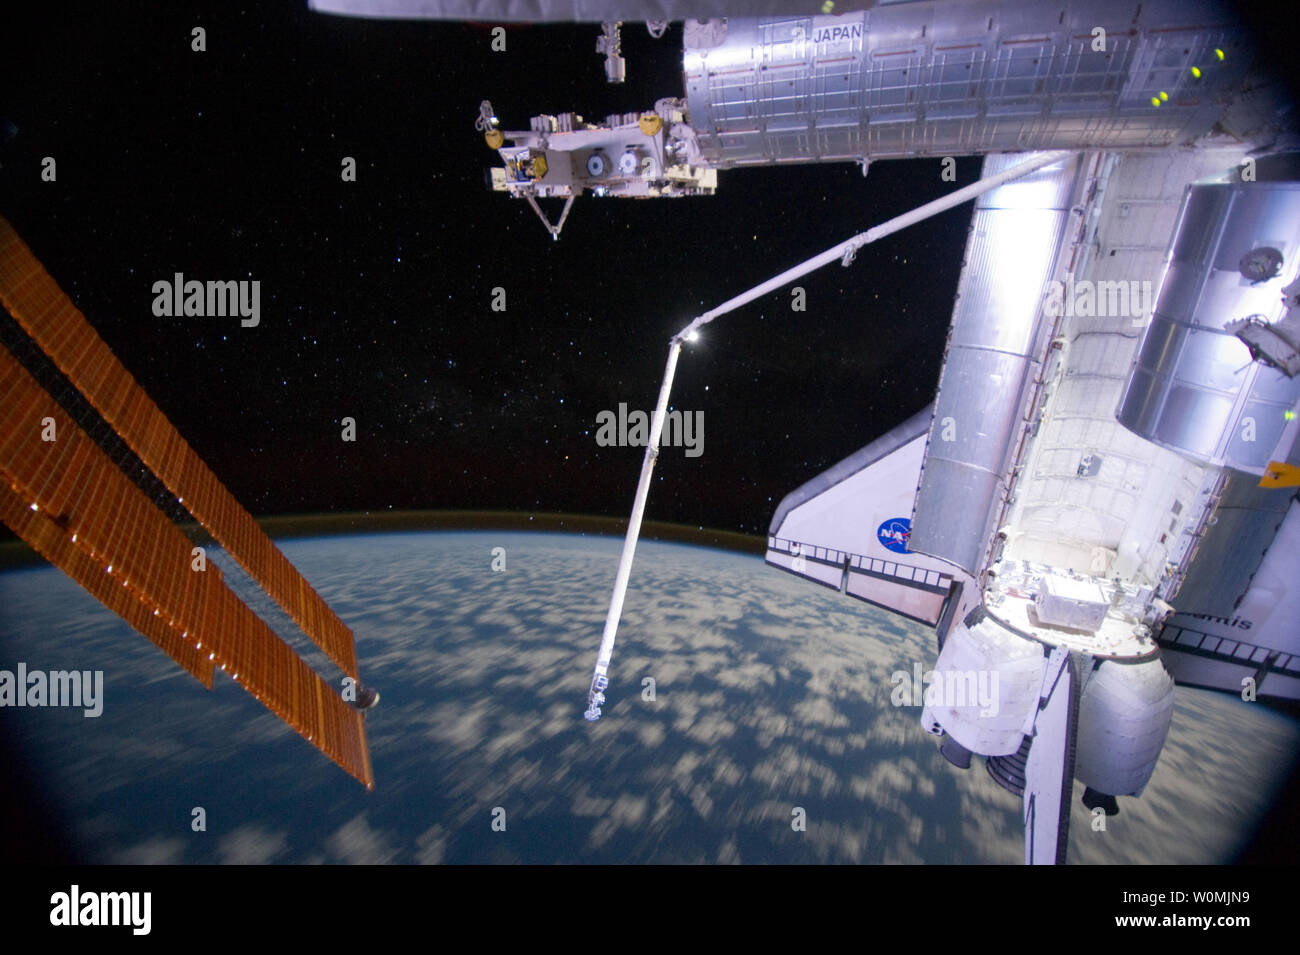 This NASA image taken on July 14, 2011 from the International Space Station, shows part of the docked space shuttle Atlantis' cargo bay and part of the station including a solar array panel as the joint complex passes over the southern hemisphere of Earth. Aurora Australis or the Soutern Lights can be seen on Earth's horizon. Space Shuttle Atlantis is at the International Space Station on mission STS-135, the final shuttle mission. UPI/NASA Stock Photo